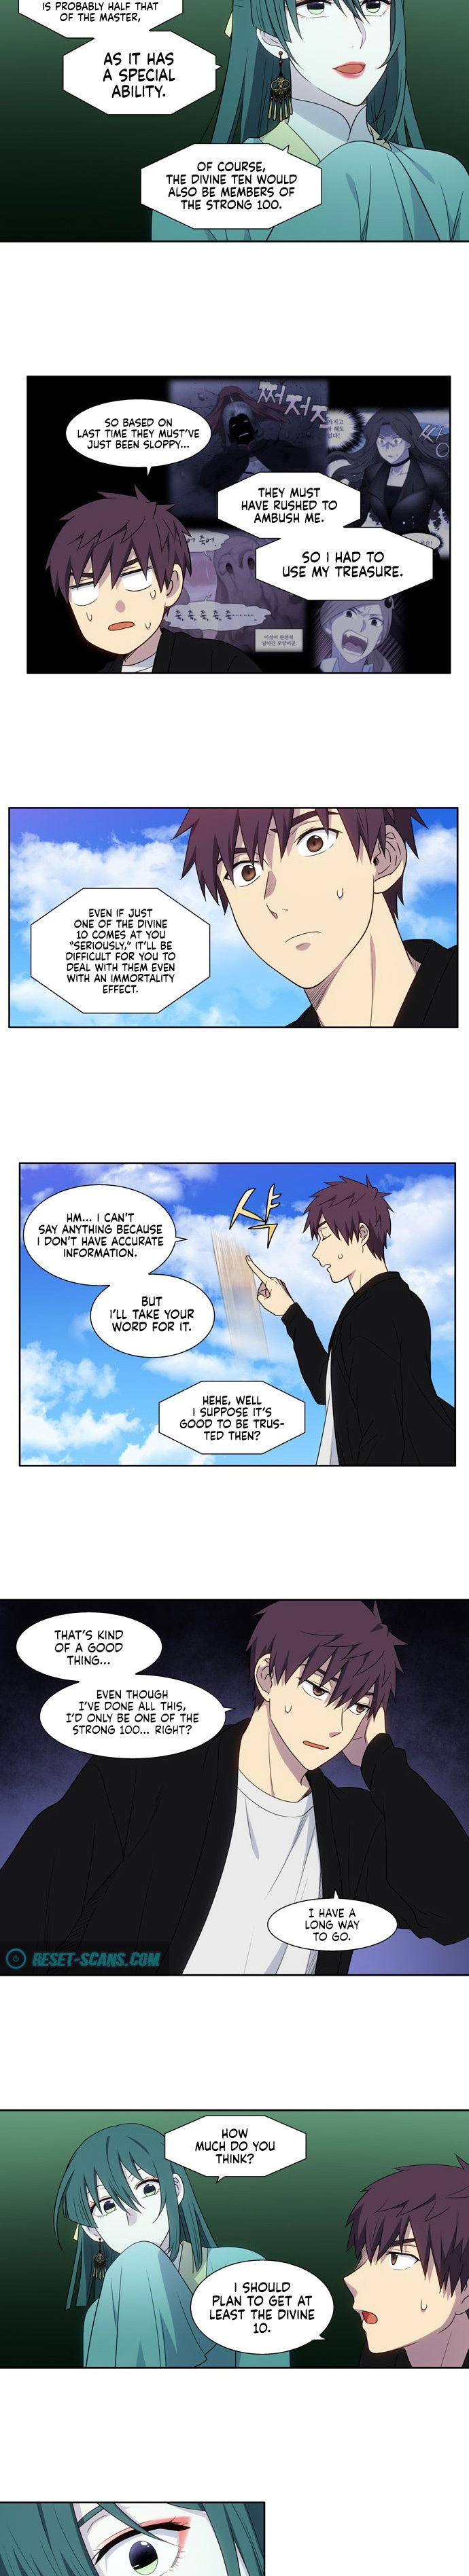 the-gamer-chap-395-4